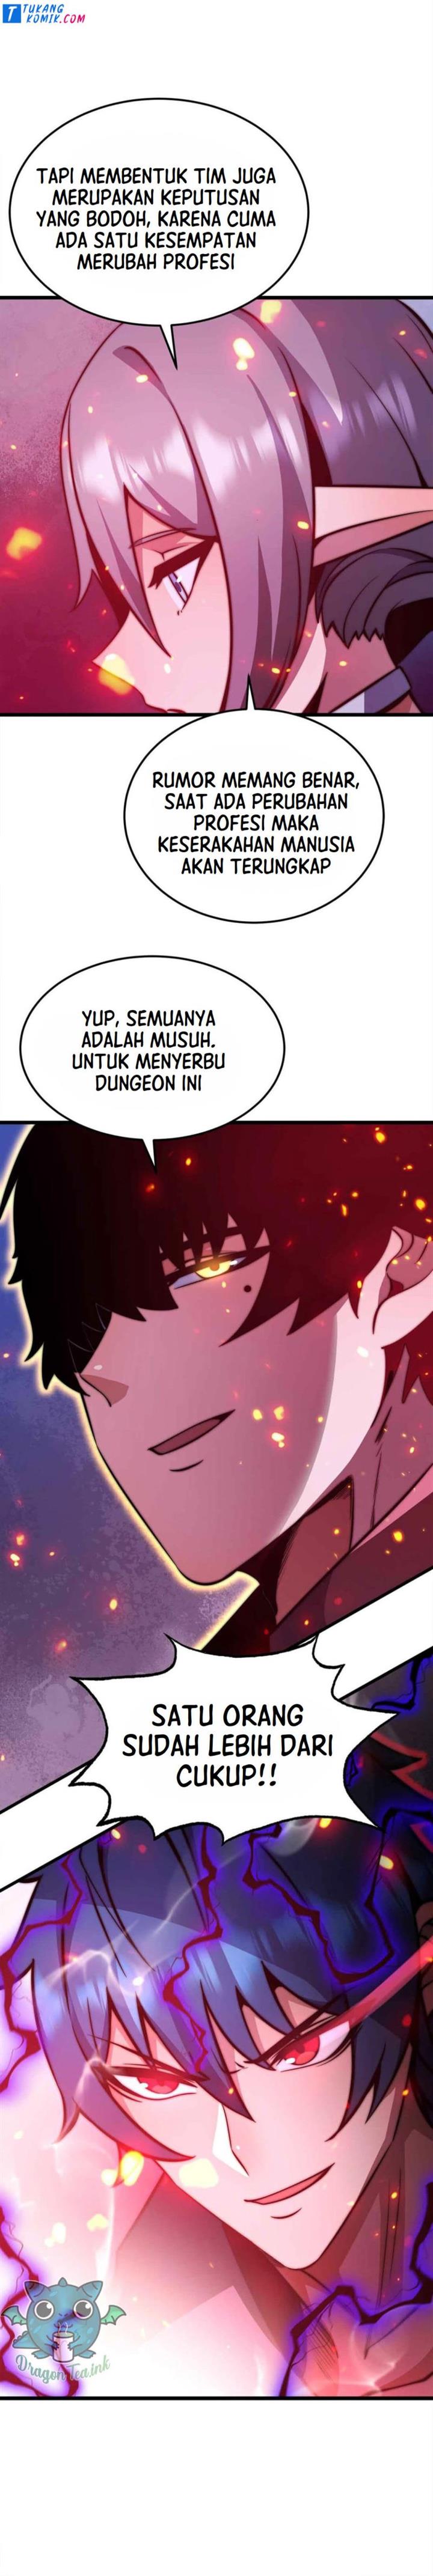 Demon King Cheat System Chapter 23